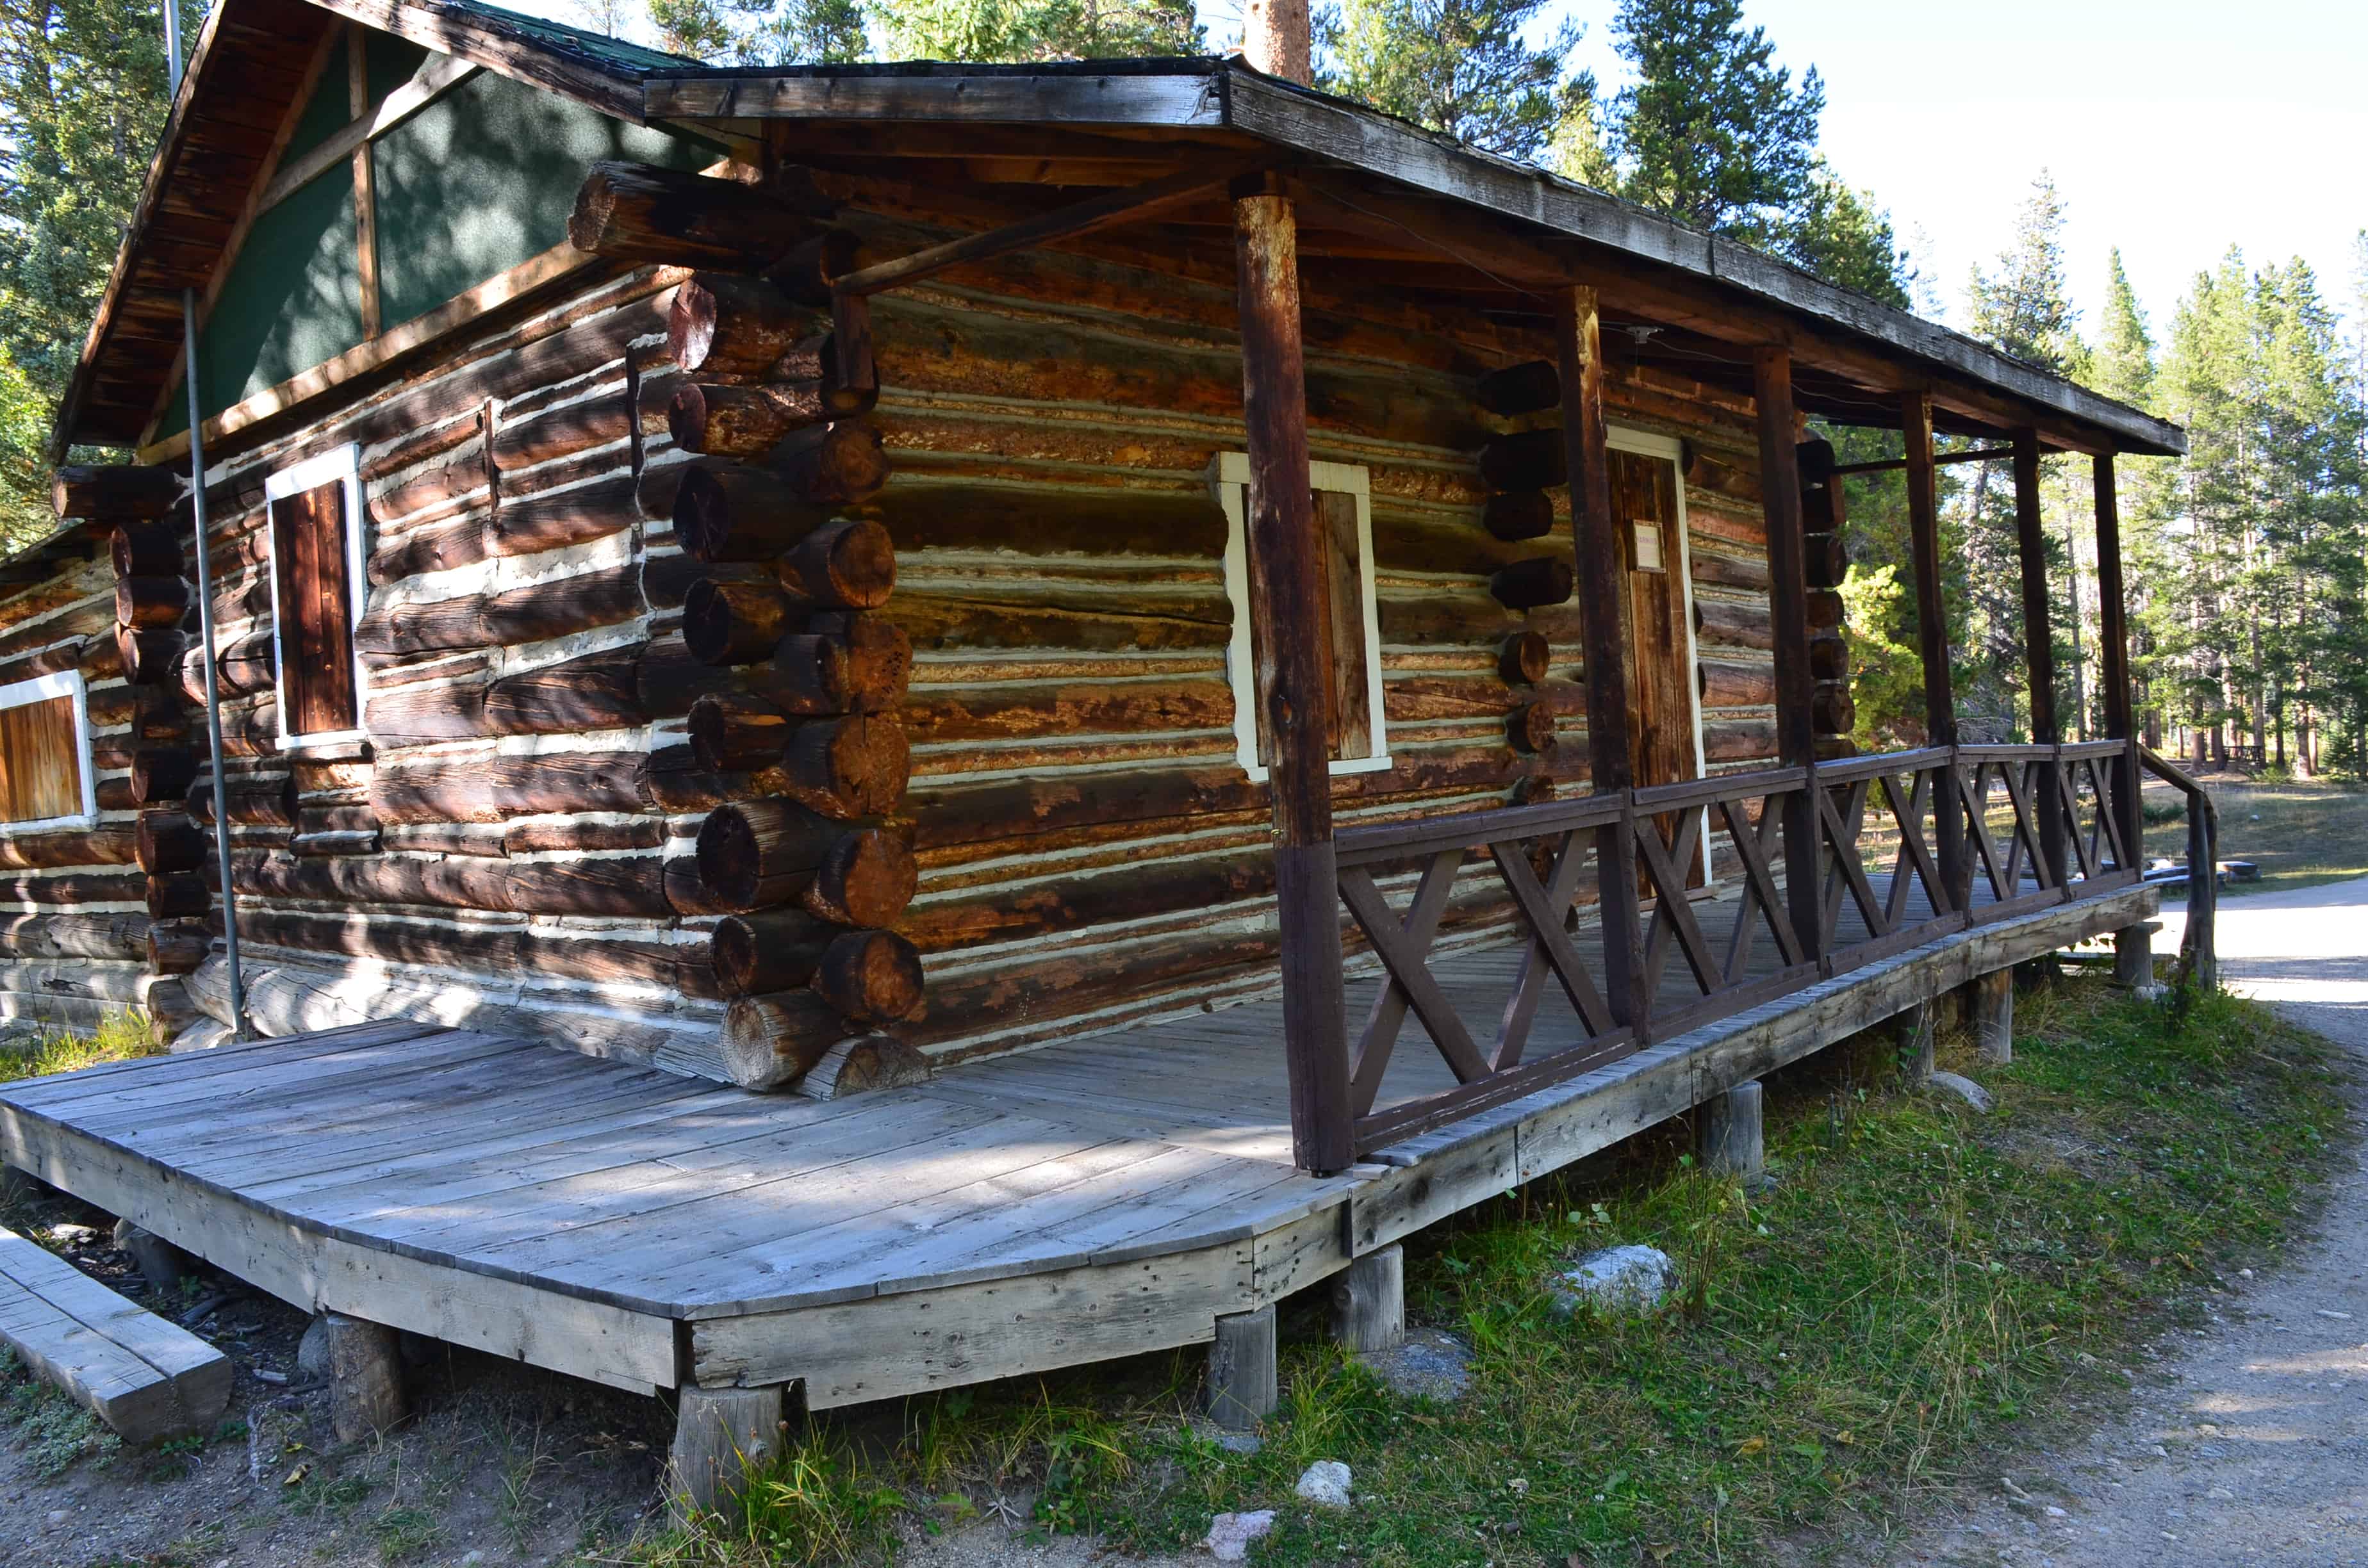 Holzwarth Trout Lodge at Holzwarth Historic Site on Trail Ridge Road in Rocky Mountain National Park, Colorado